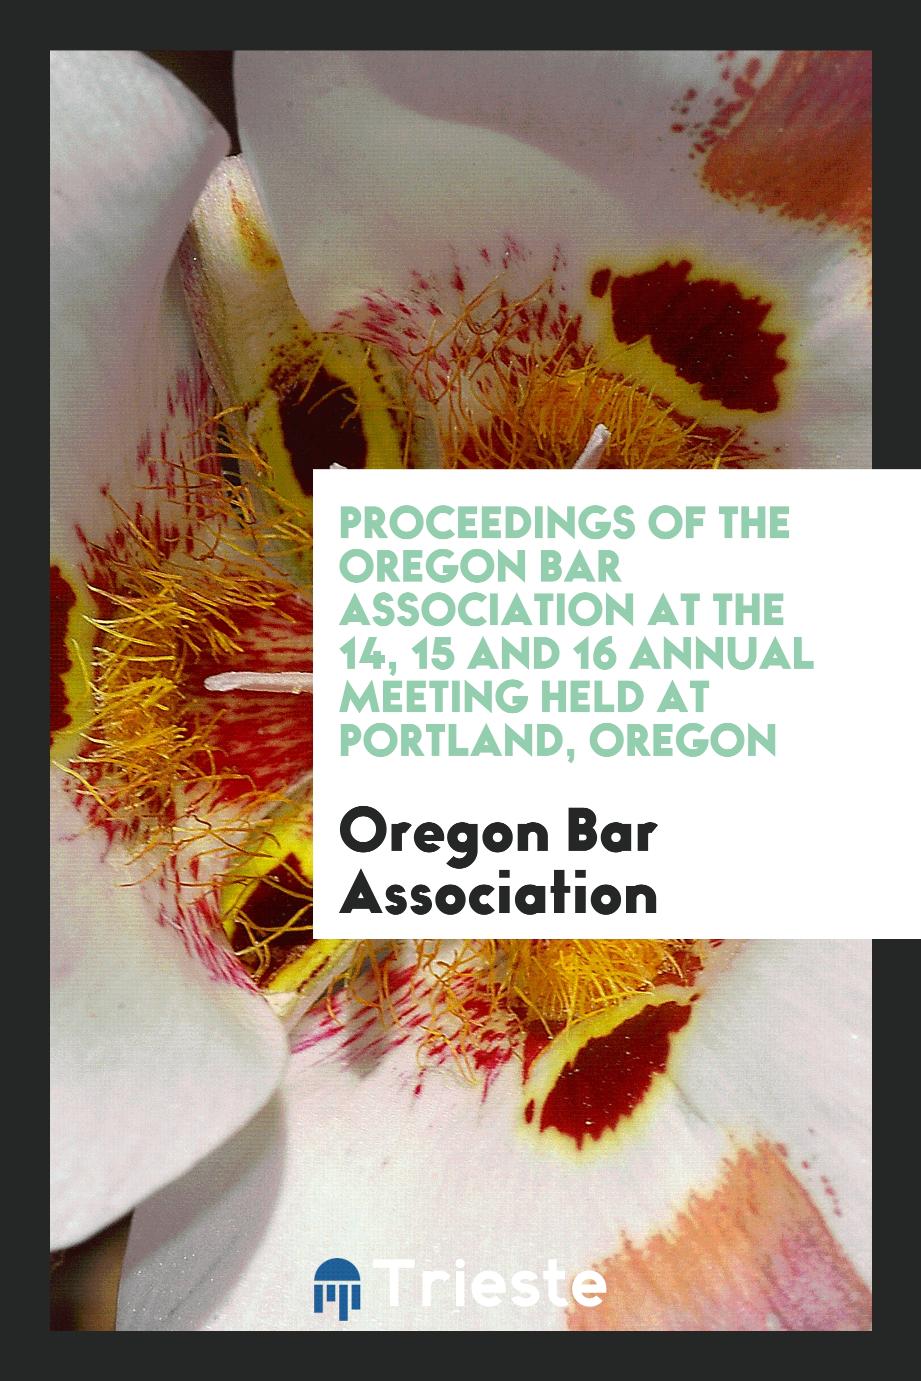 Proceedings of the Oregon Bar Association at the 14, 15 and 16 Annual Meeting Held at Portland, Oregon